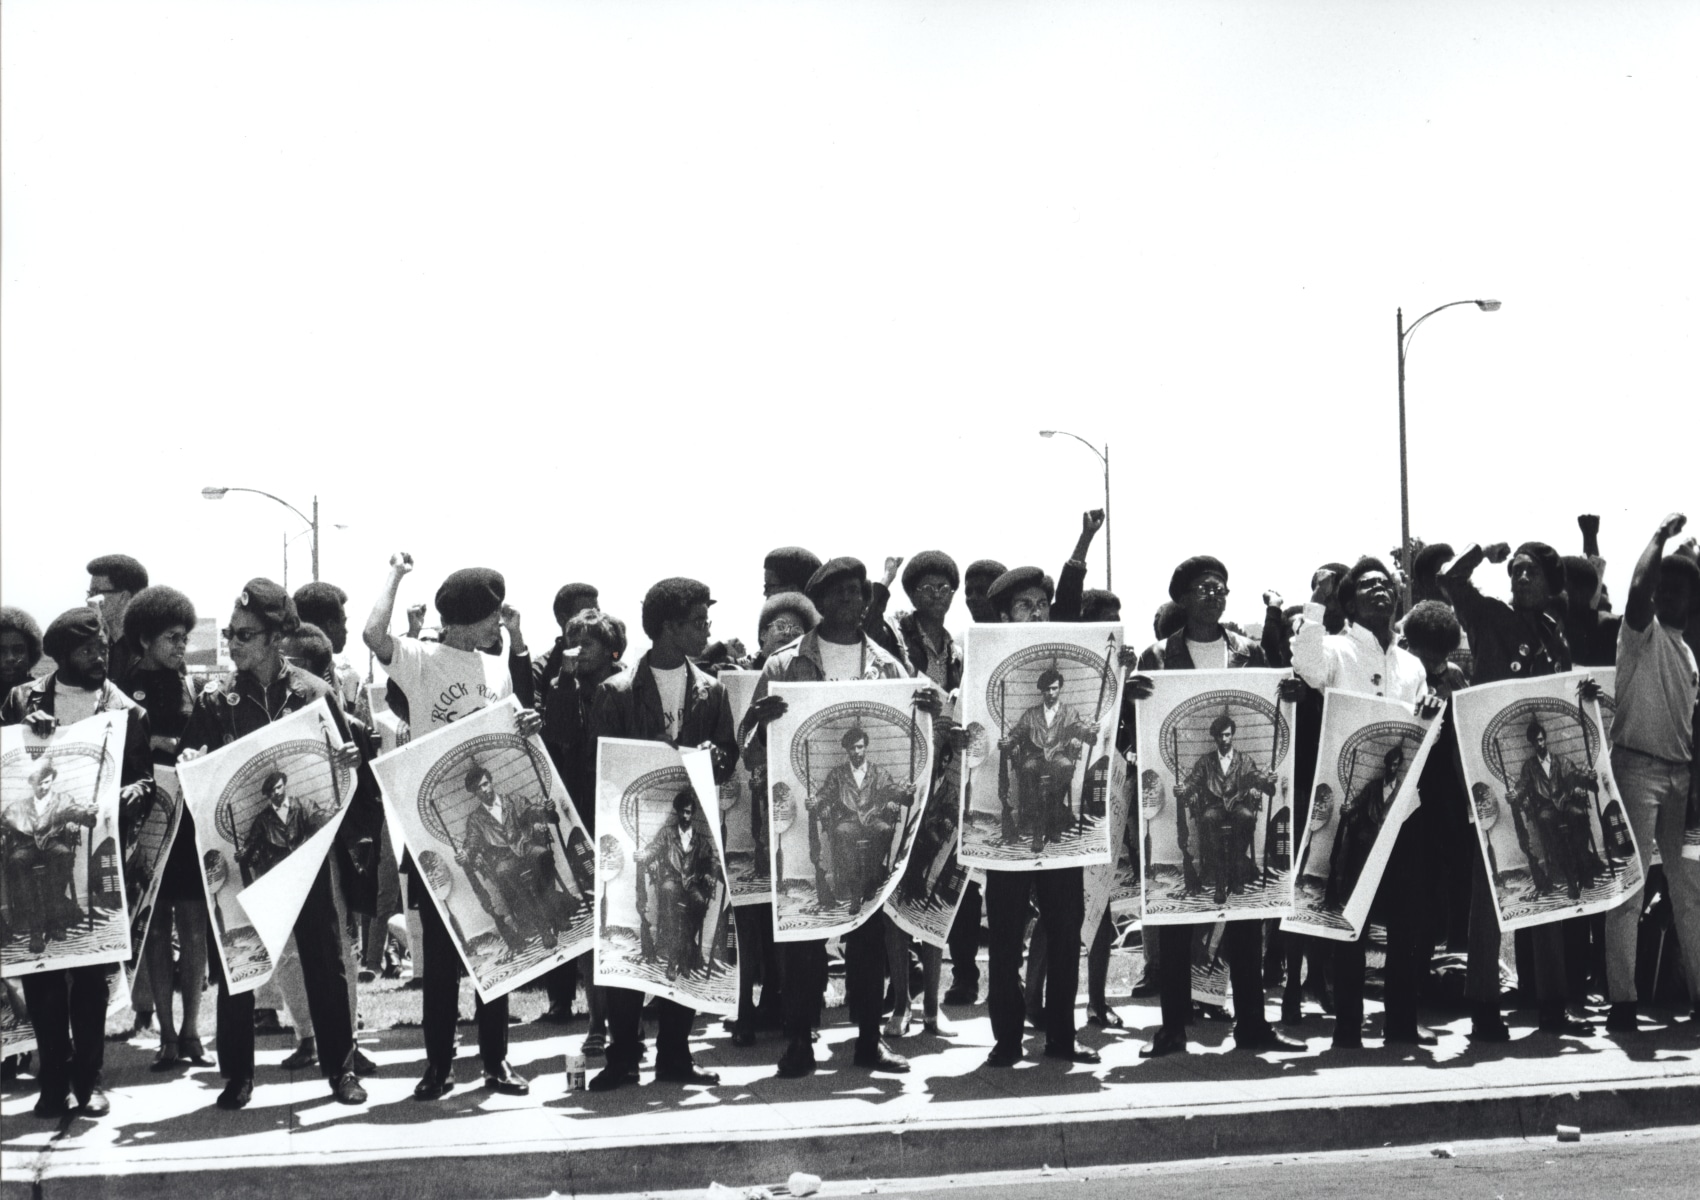 Power to the People: The Black Panthers in Photographs by Stephen Shames  and Graphics by Emory Douglas - Exhibitions - Steven Kasher Gallery